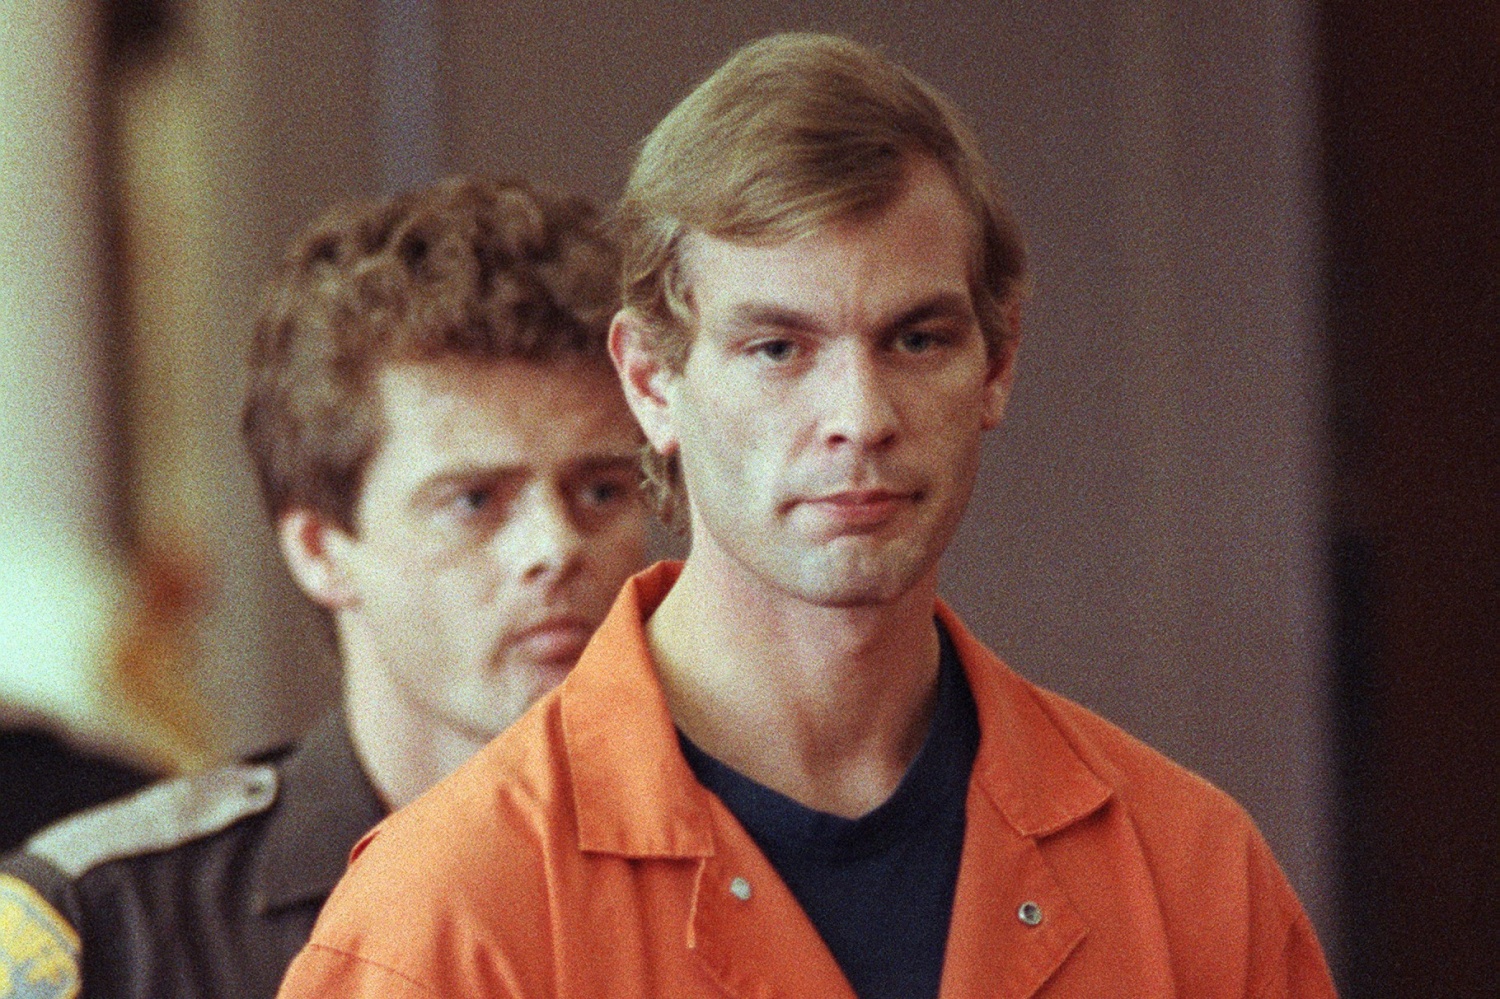 Jeffrey Dahmer s Story on Netflix Inaccurate: Mother of Murderer s